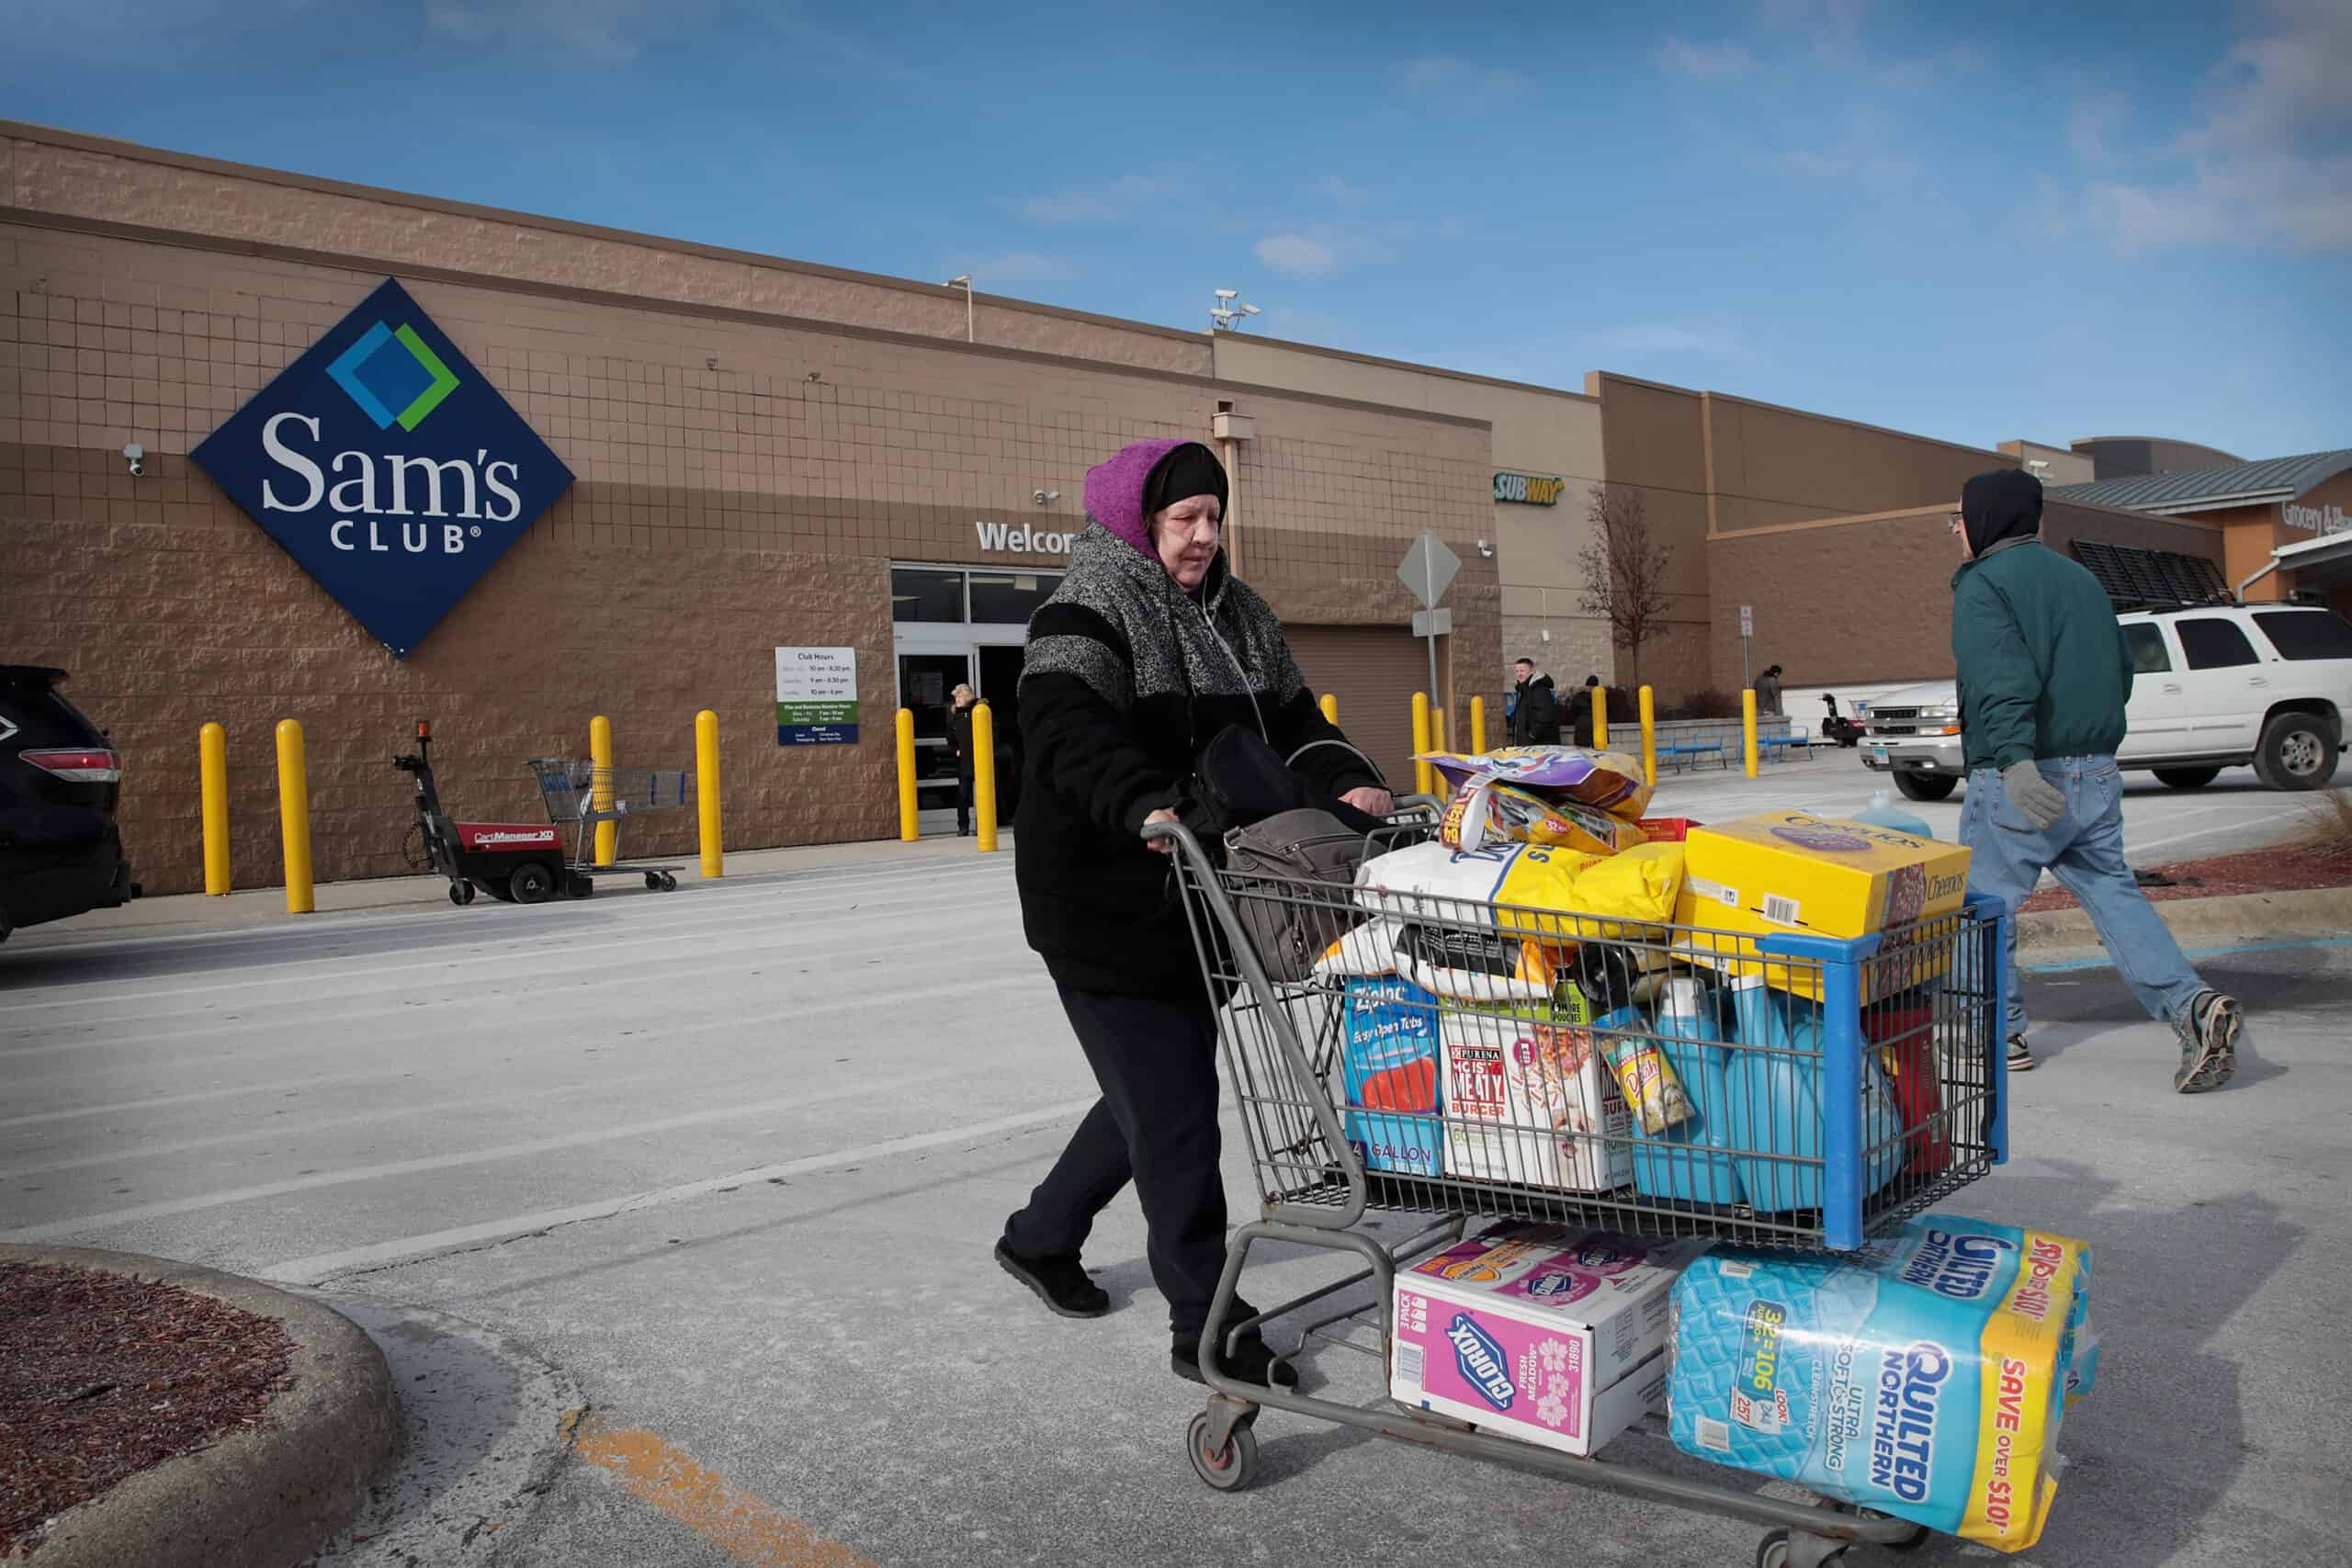 Shoppers stock up on merchandise at a Sam's Club store in Streamwood, Illinois